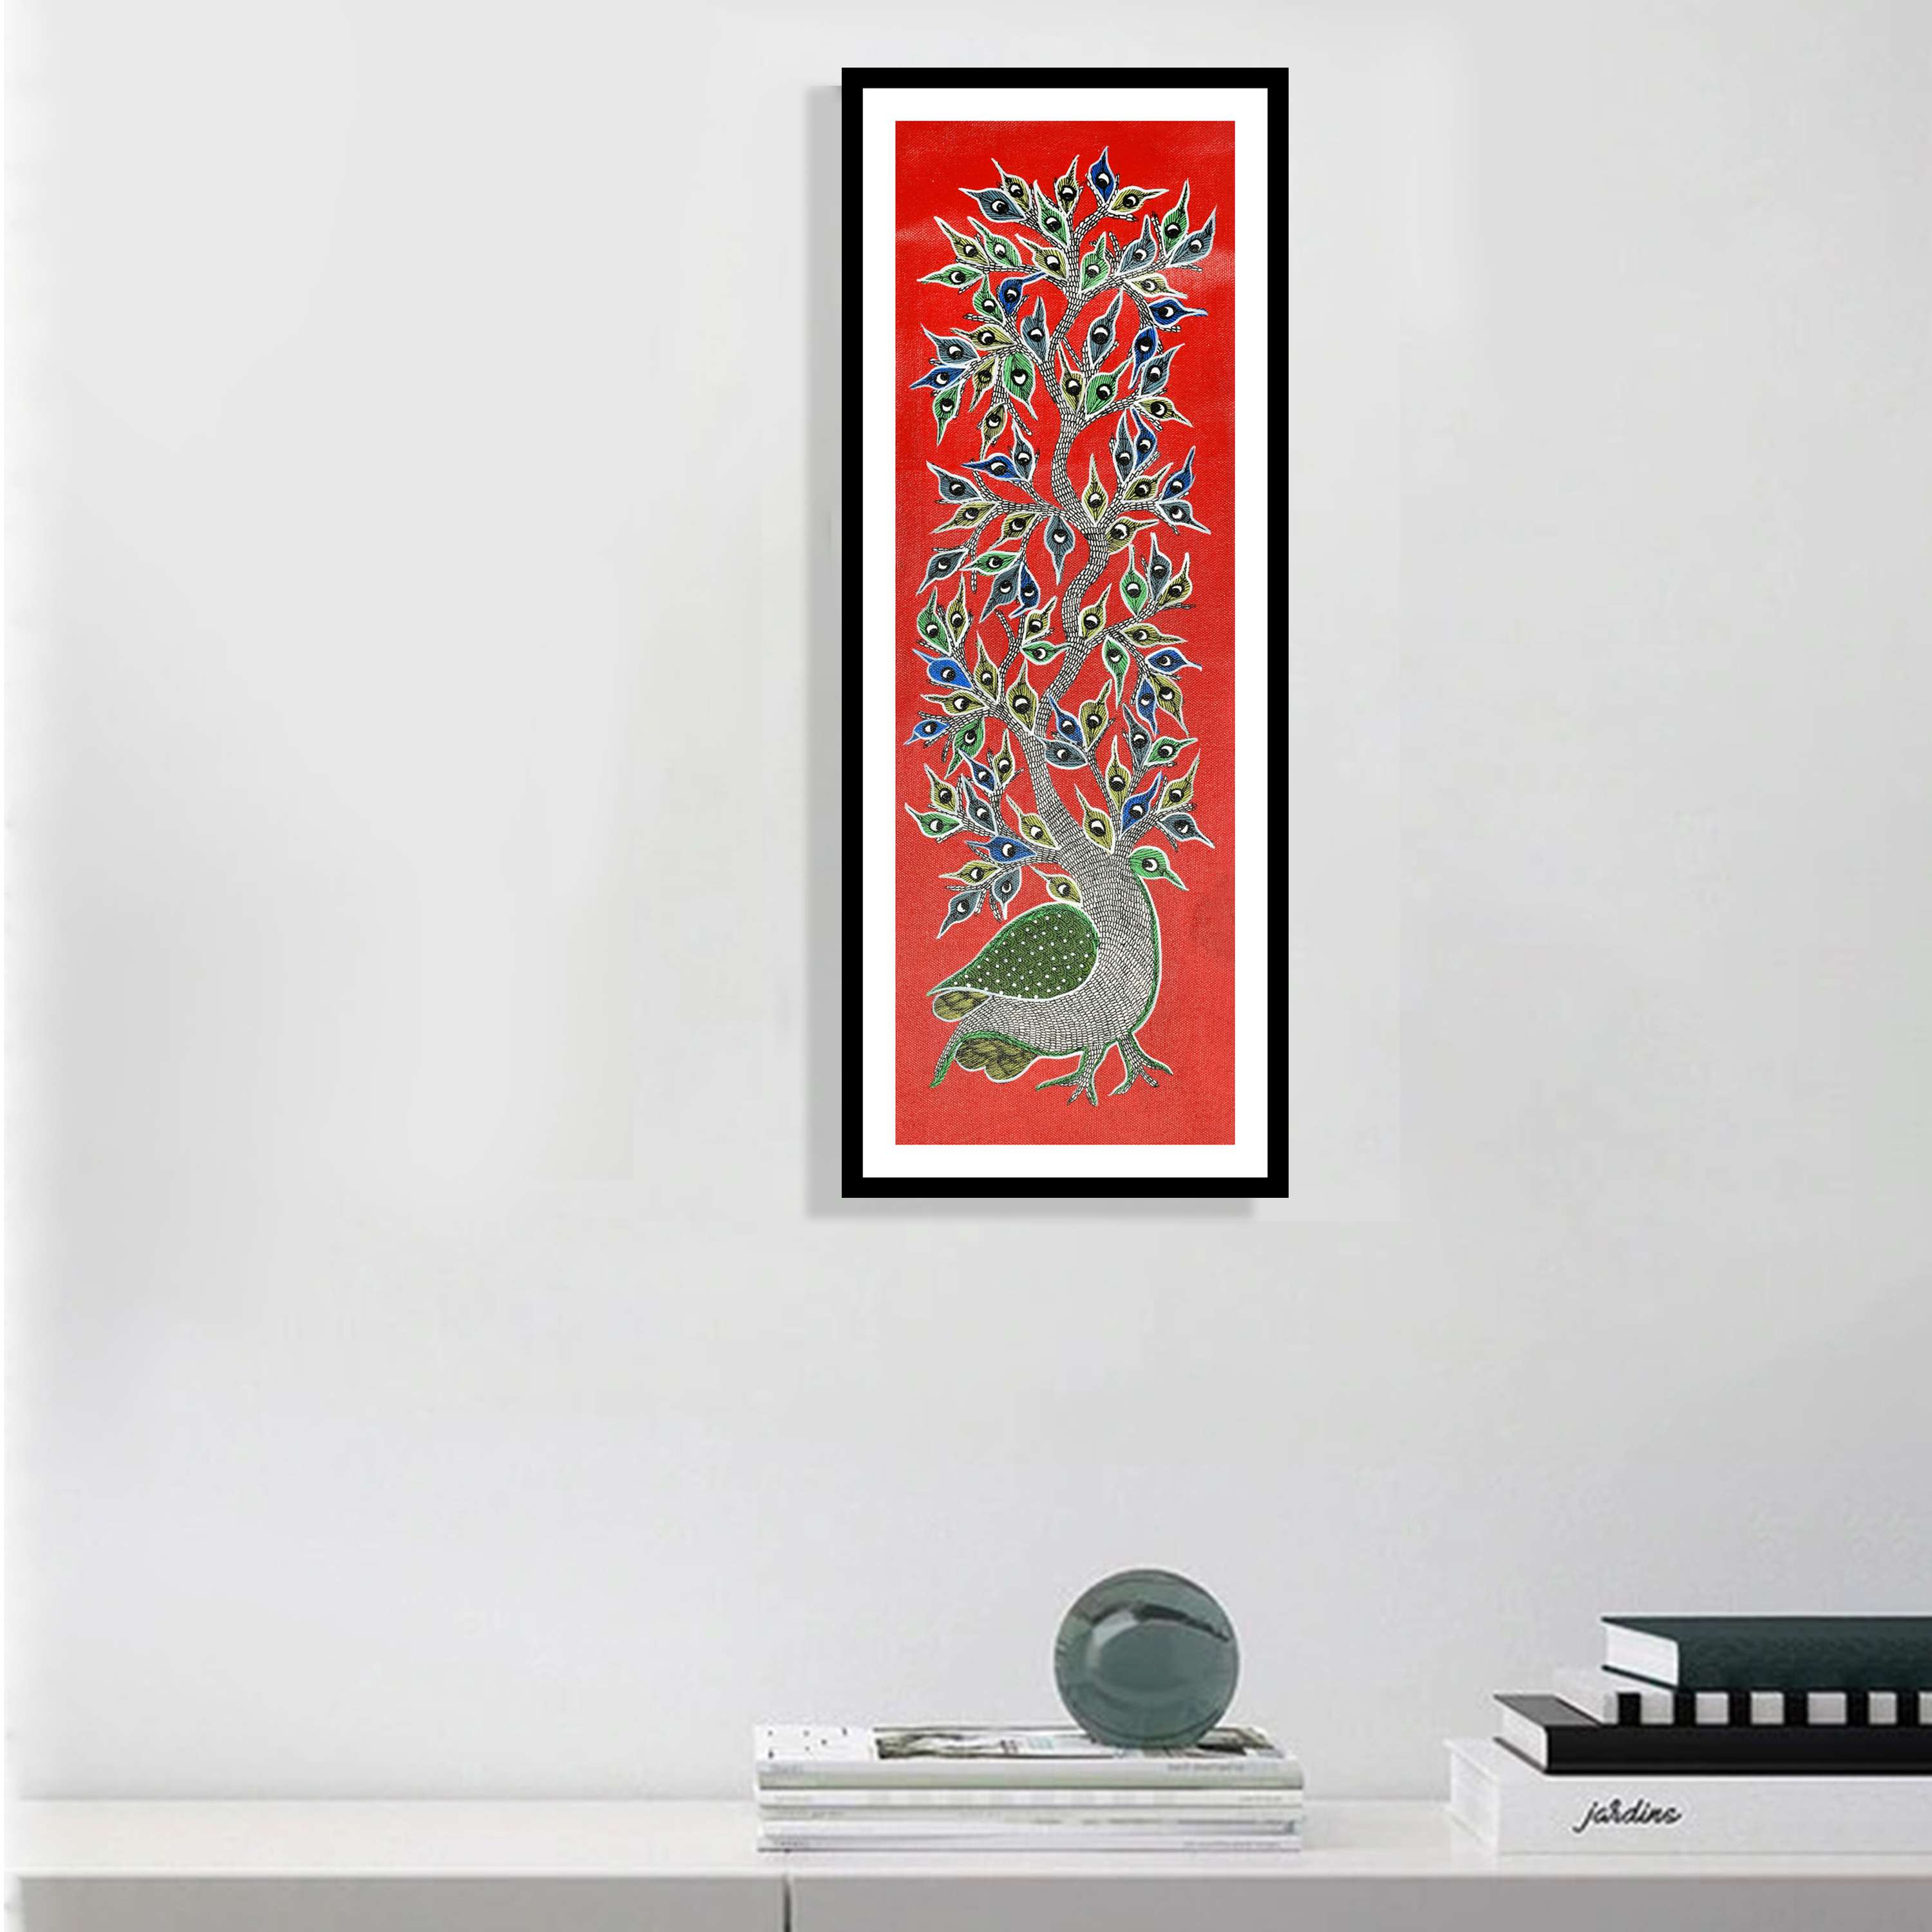 Framed Gond Art Painting of Peacock & Tree | Traditional Gond Painting for Home & Office Wall Art Decor